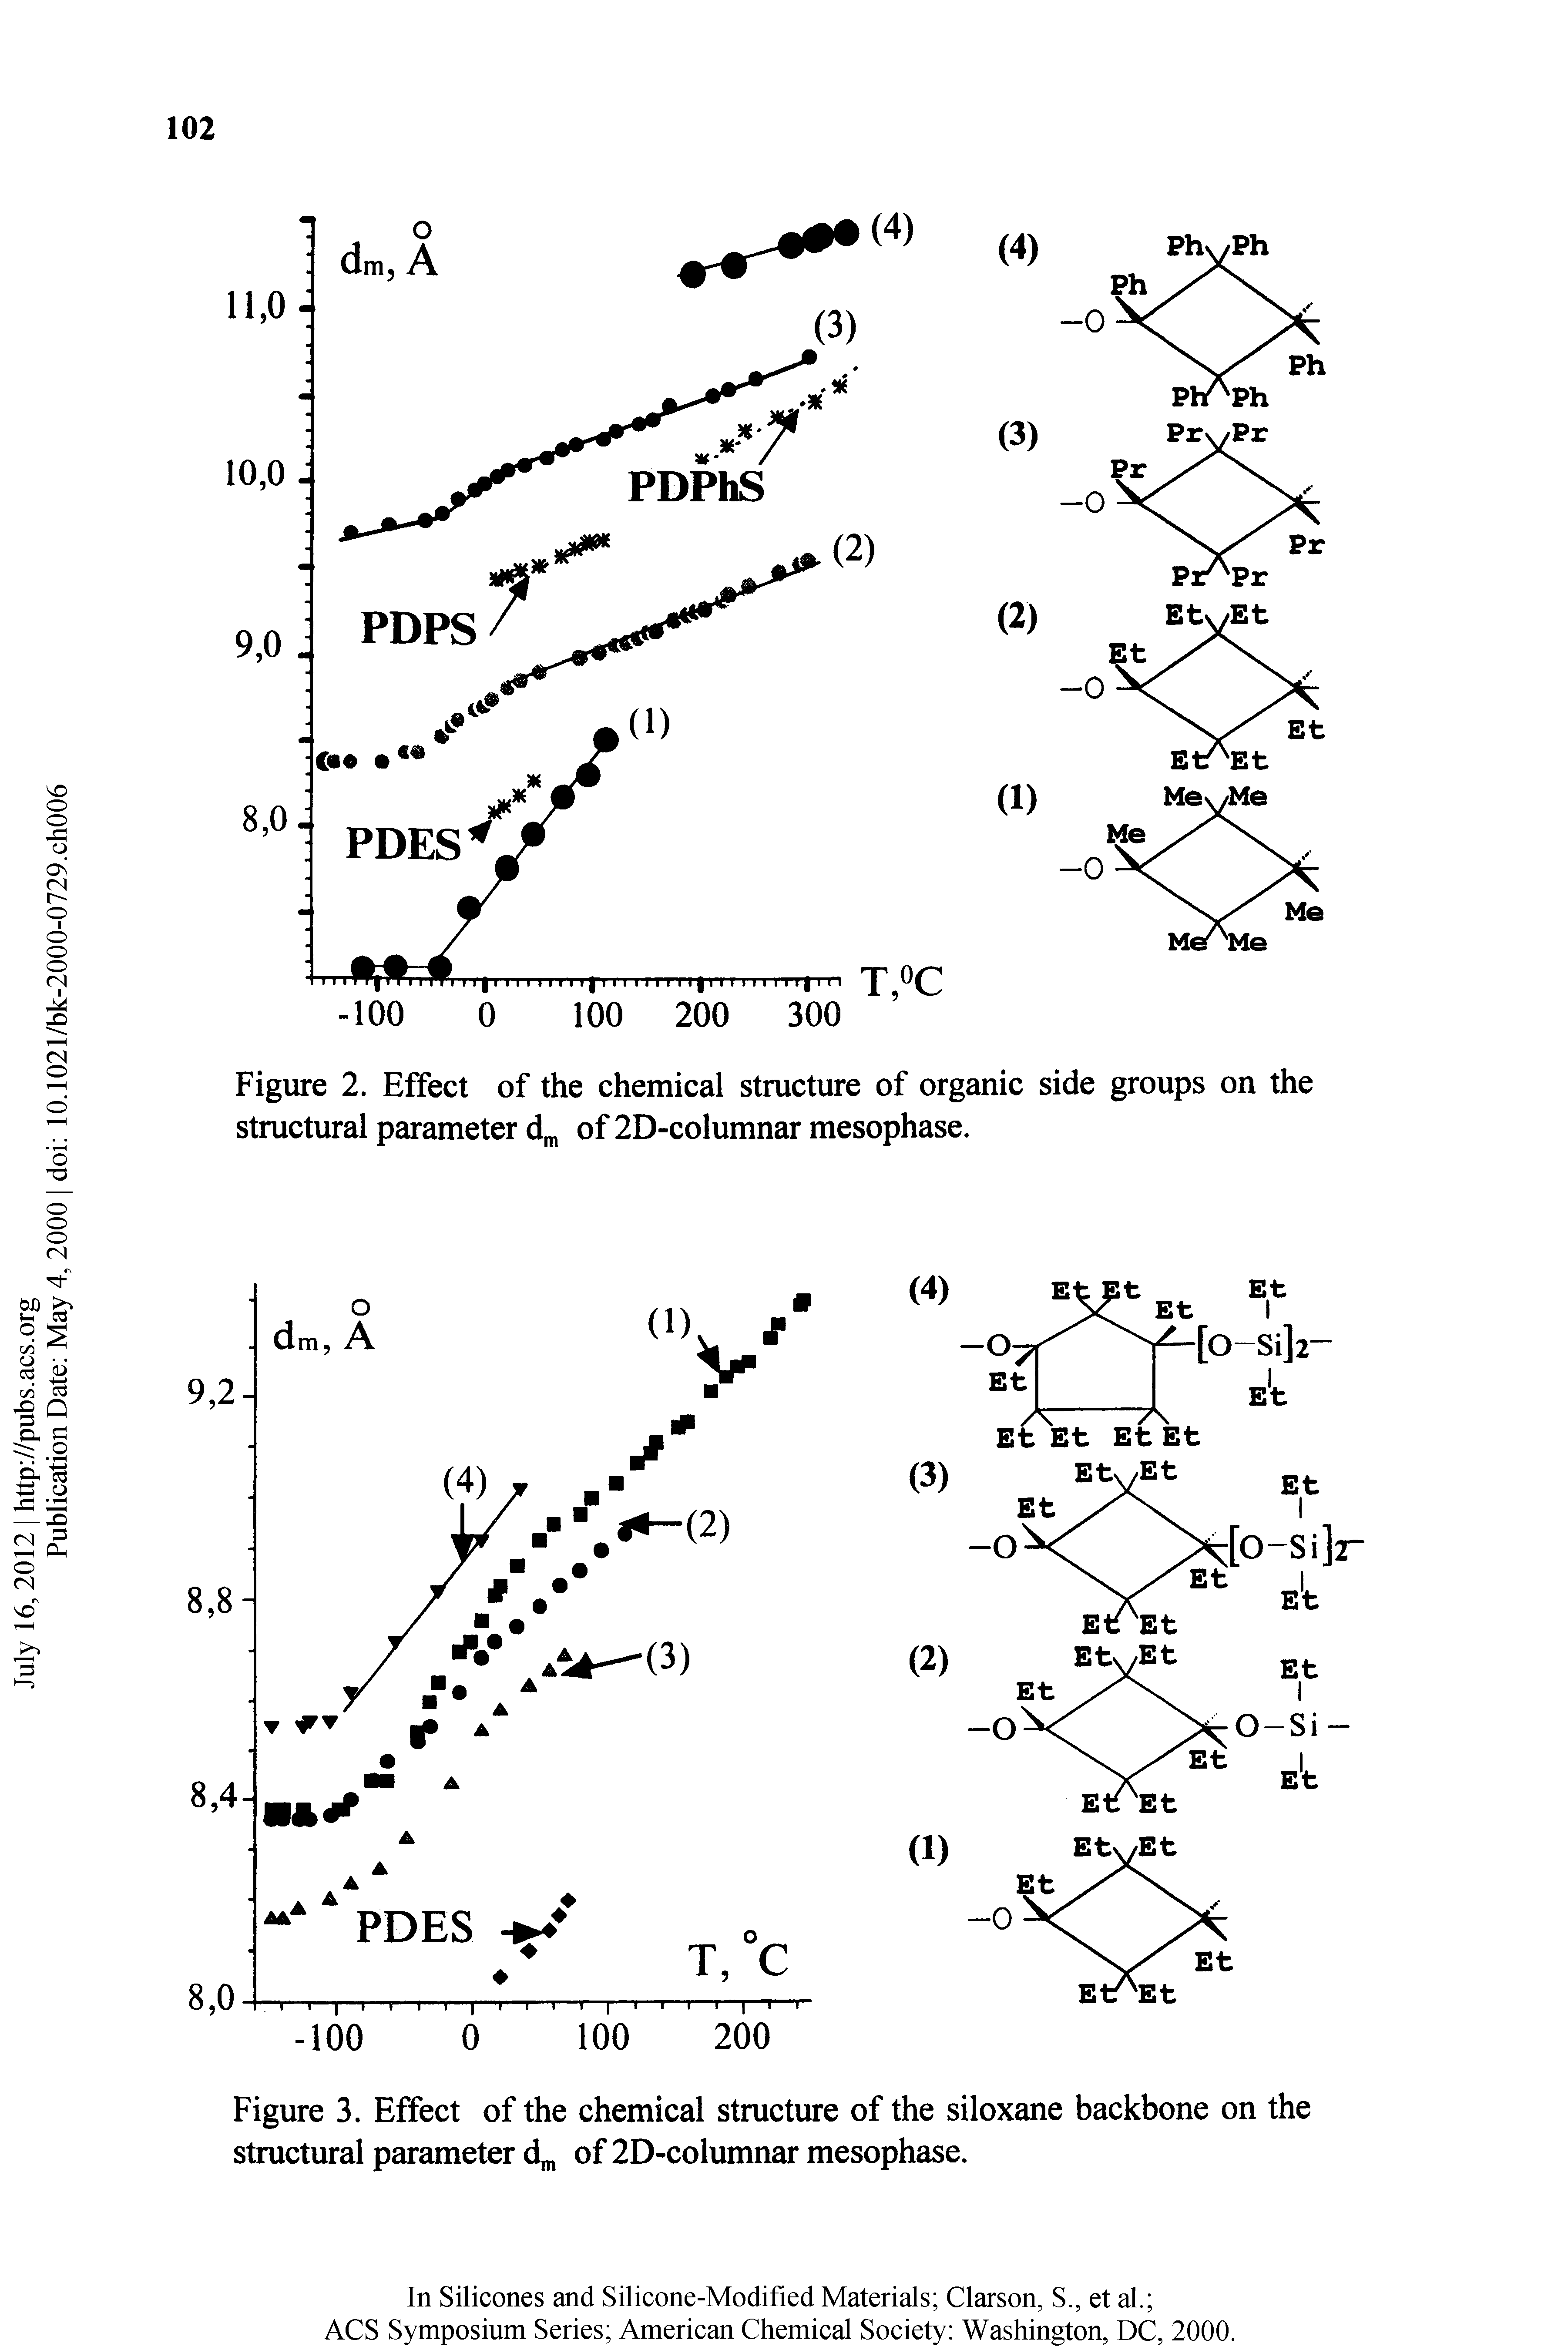 Figure 2. Effect of the chemical structure of organic side groups on the structural parameter of 2D-columnar mesophase.